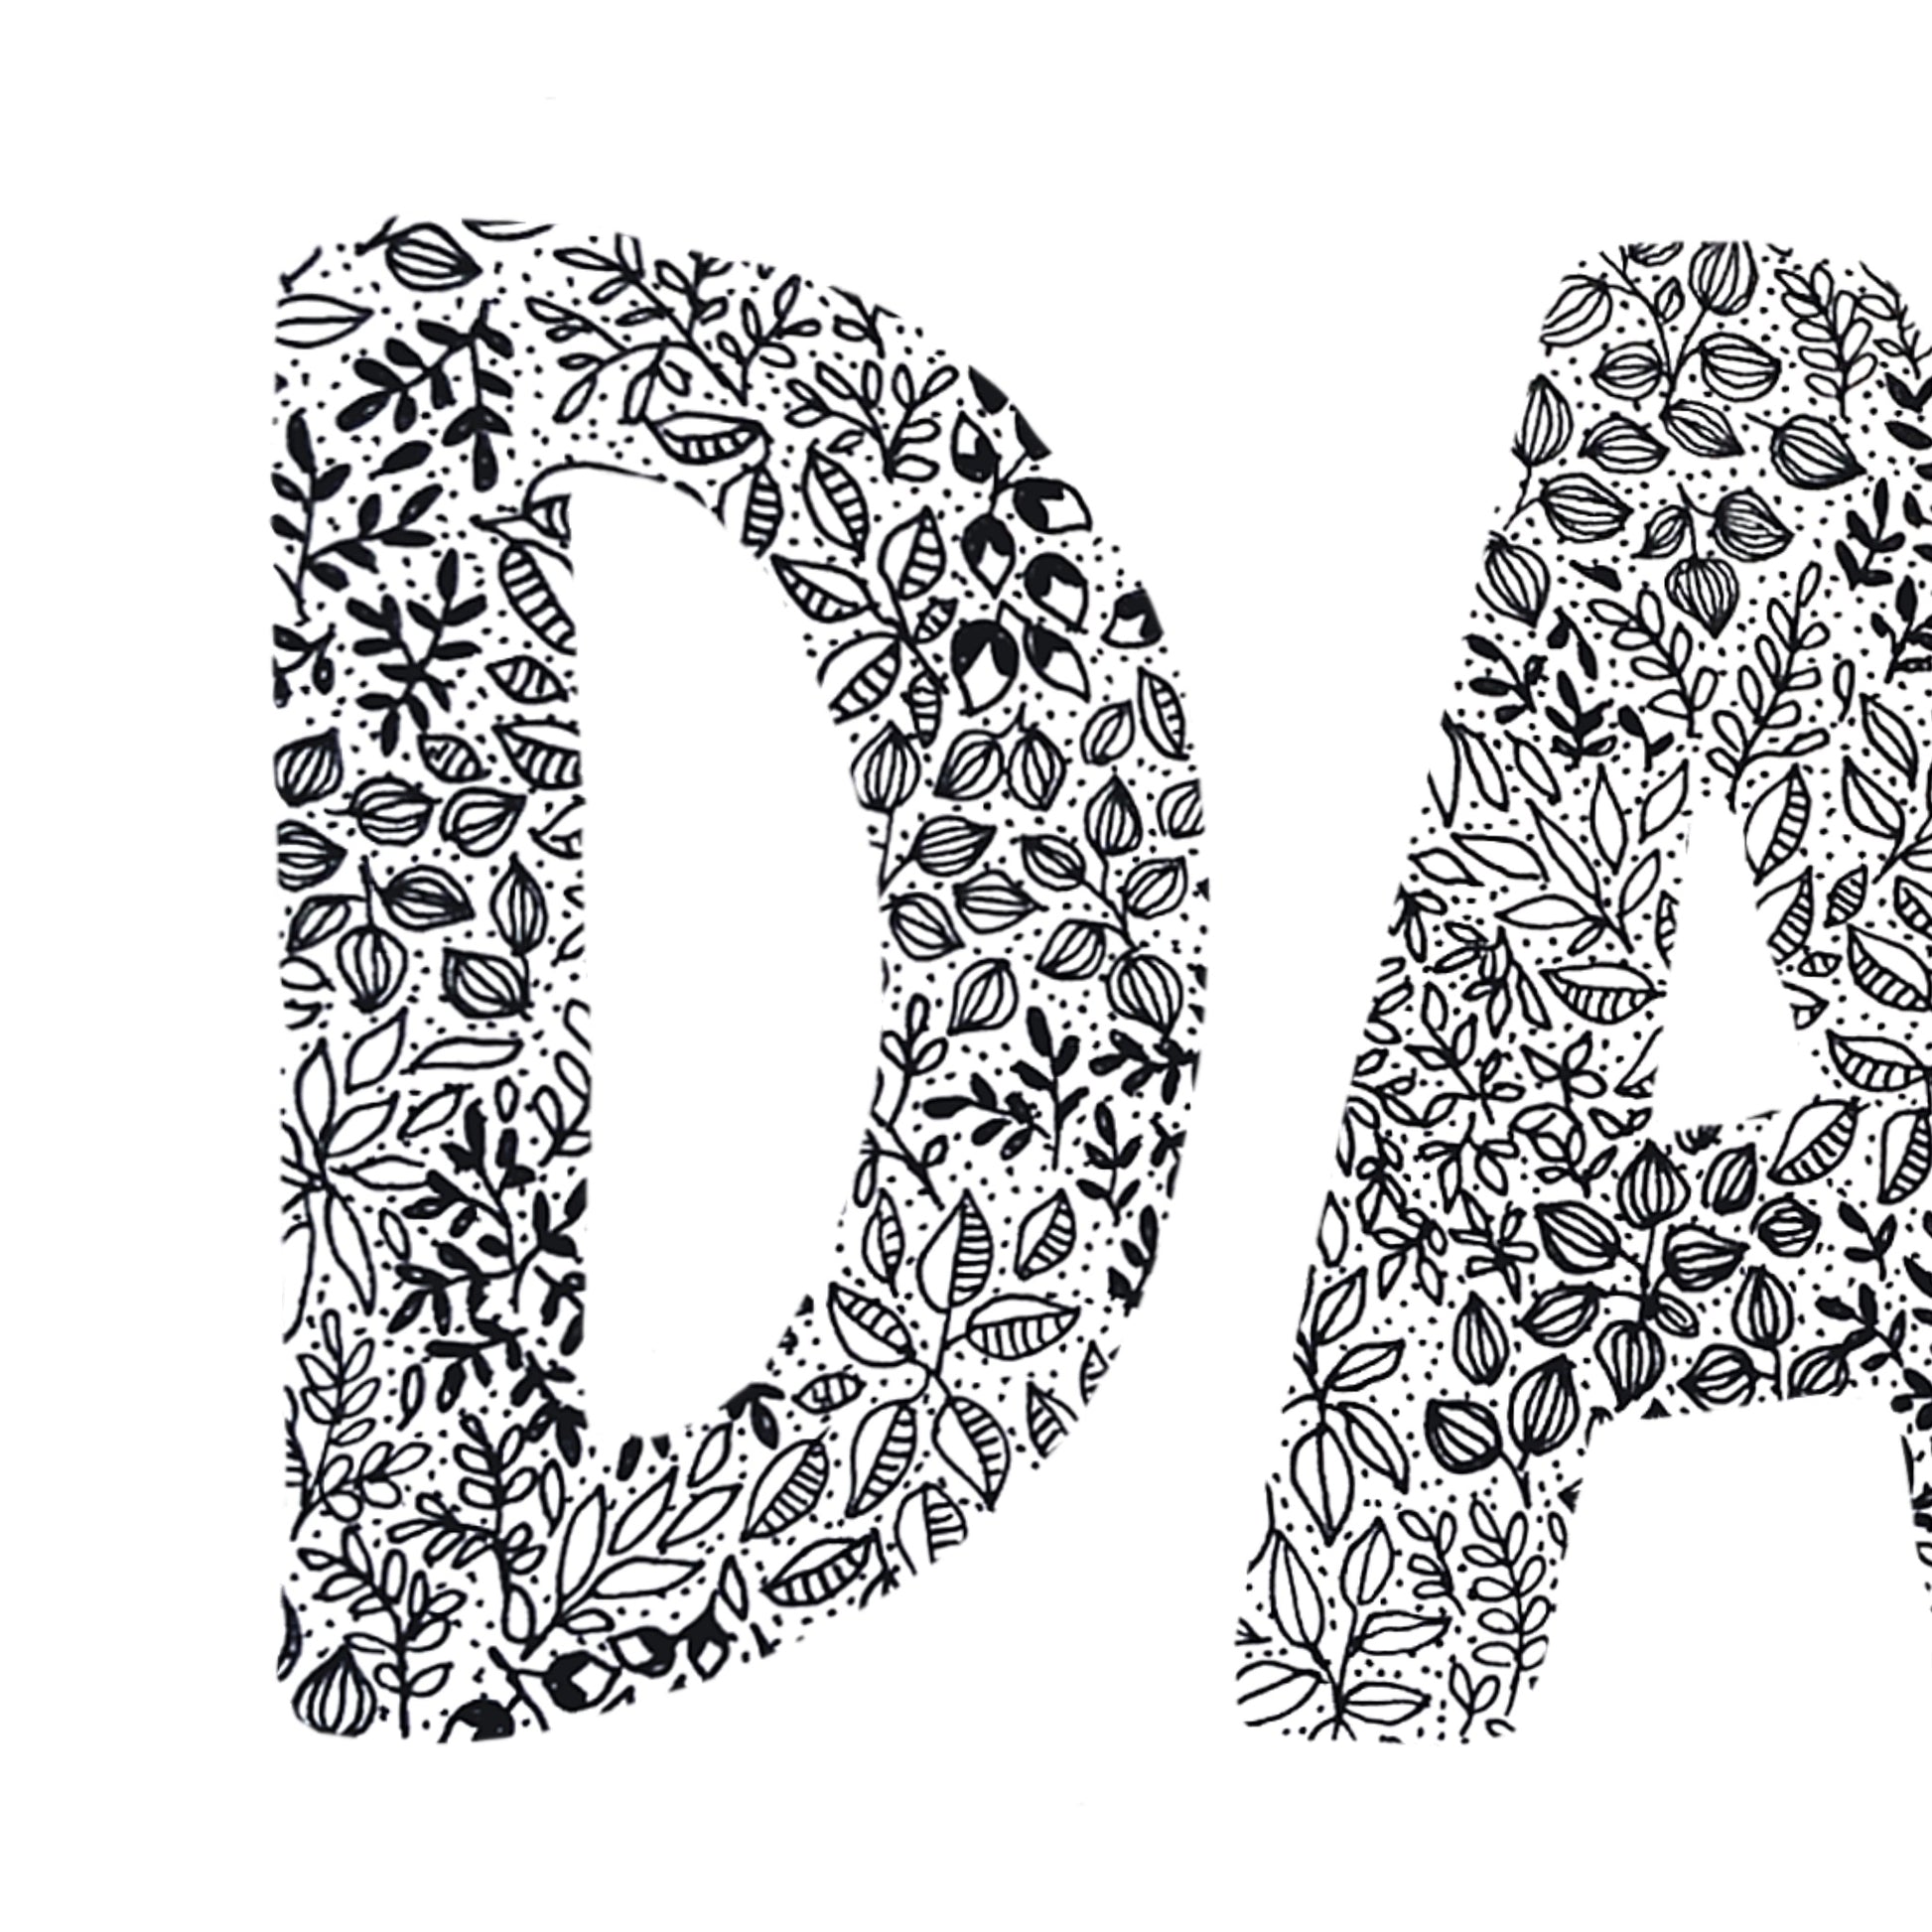 Image shows close up of an illustration with the word DAD drawn from black and white flowers. there is great detail in this image with a variety of flowers and dots that make up this drawing. 